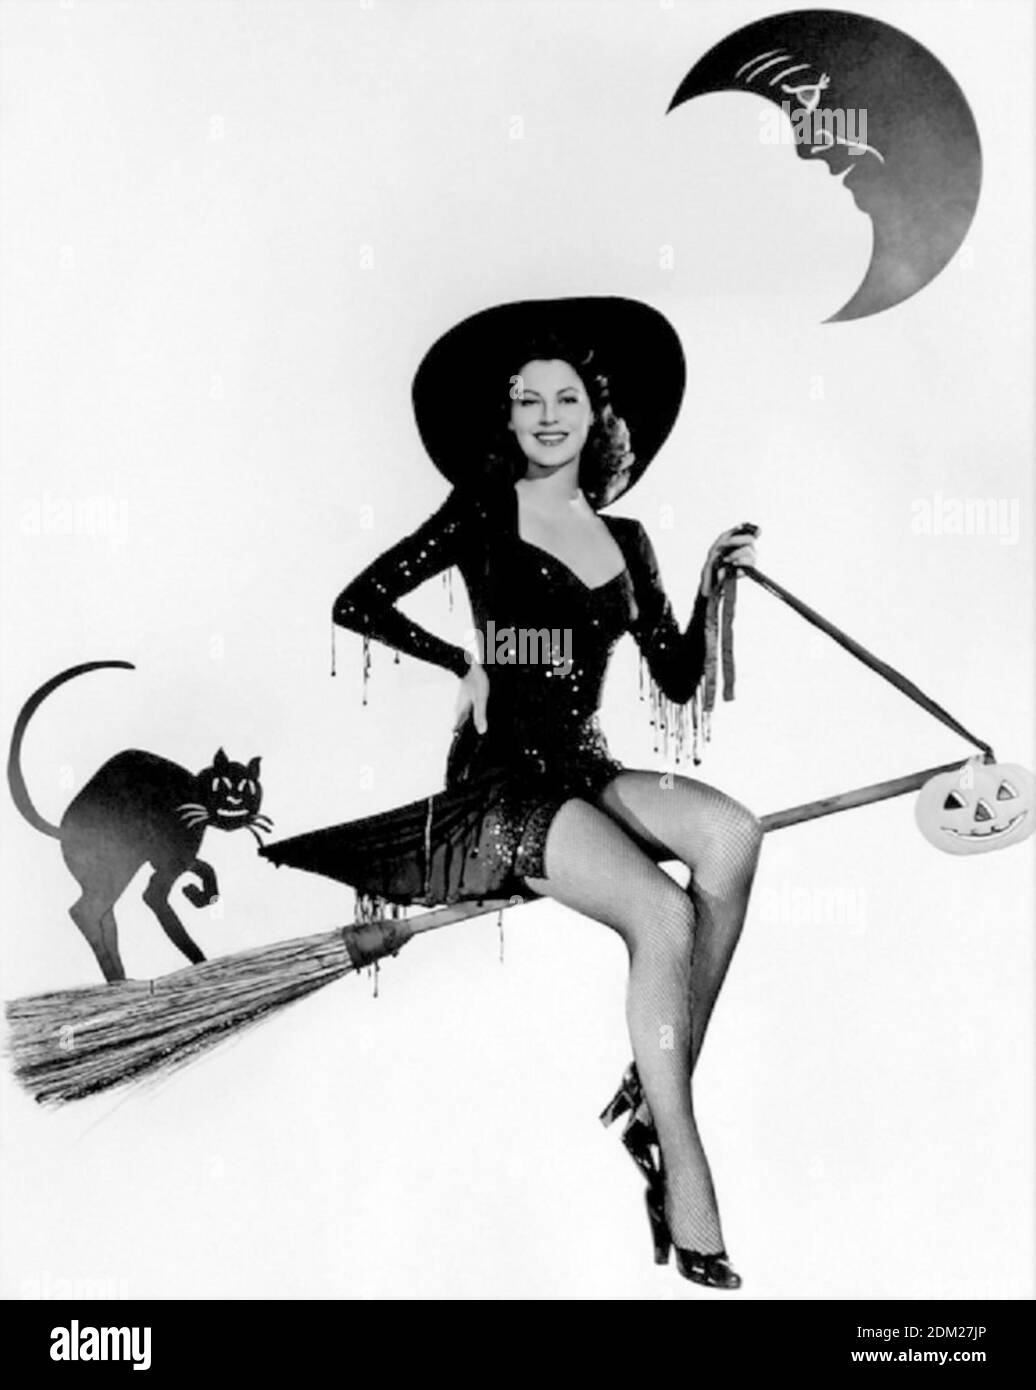 HALLOWEEN Hollywood Pinup style vers 1940 Banque D'Images